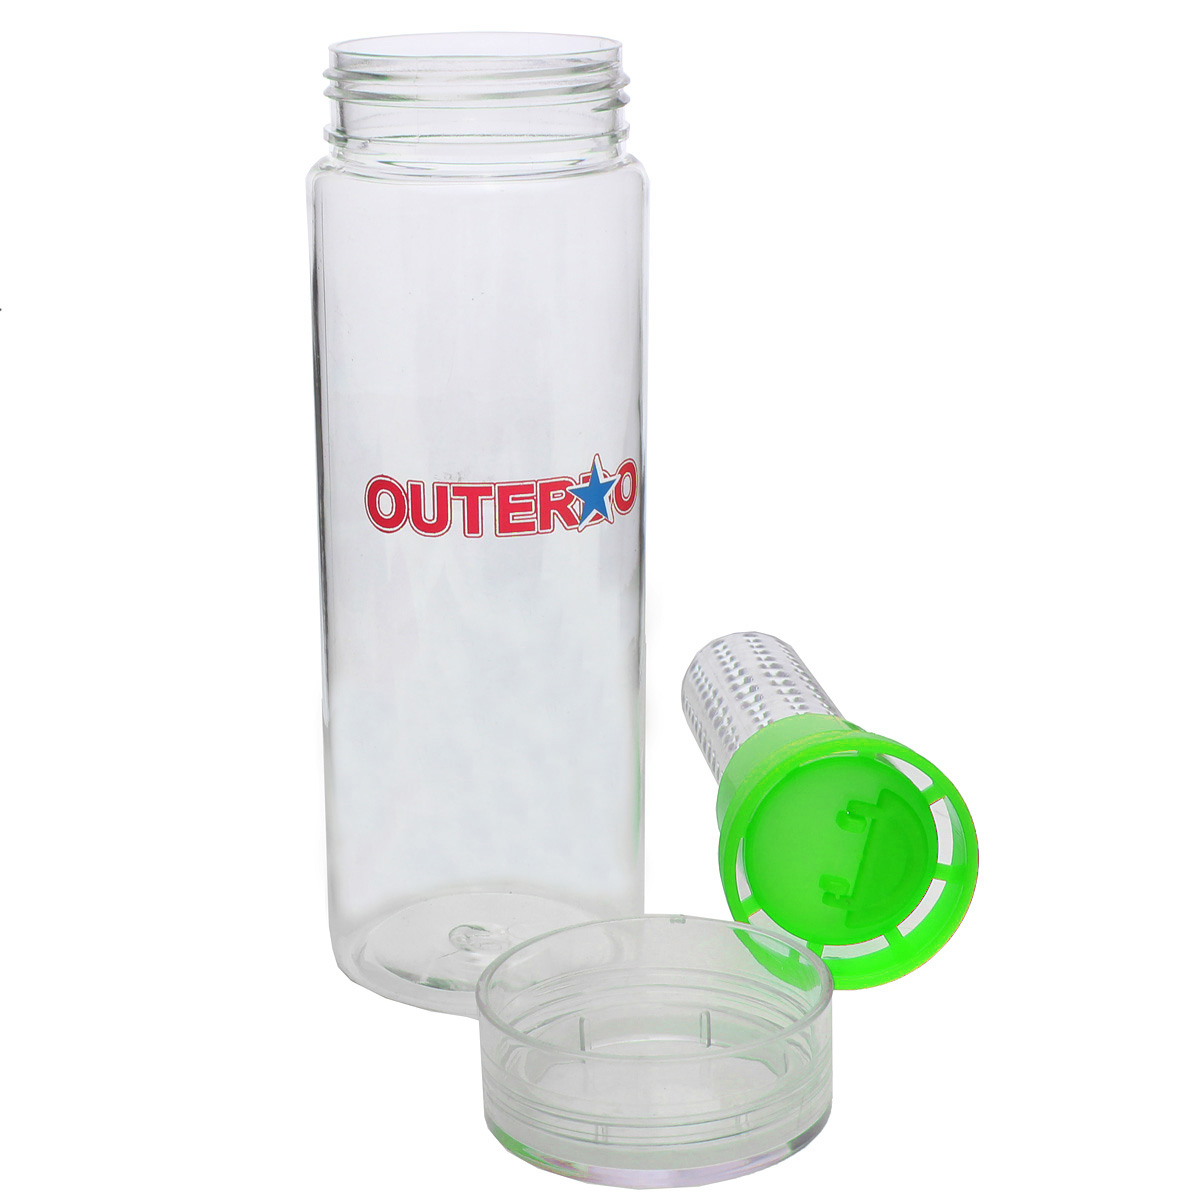 OUTERDO-780ml-Plastic-Water-Bottles-Filter-Water-Cups-Large-Capacity-Fruit-Cups-Outdoor-Sports-Cups--1884810-5